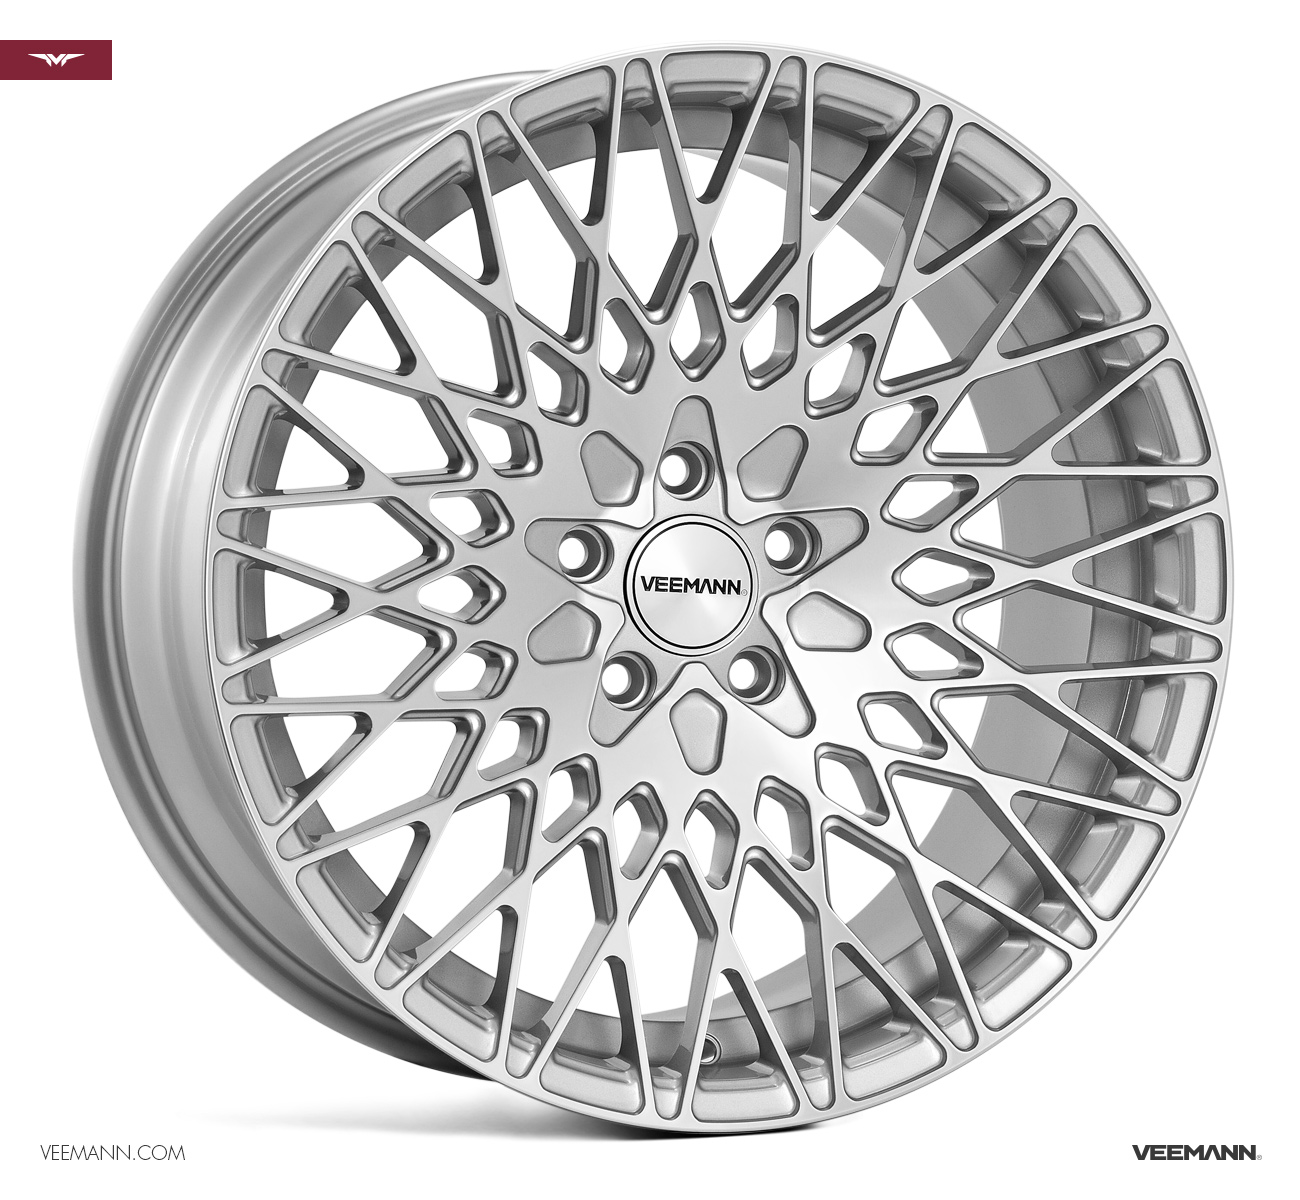 NEW 19" VEEMANN VC540 ALLOY WHEELS IN SILVER POLISHED WITH WIDER 9.5" REARS